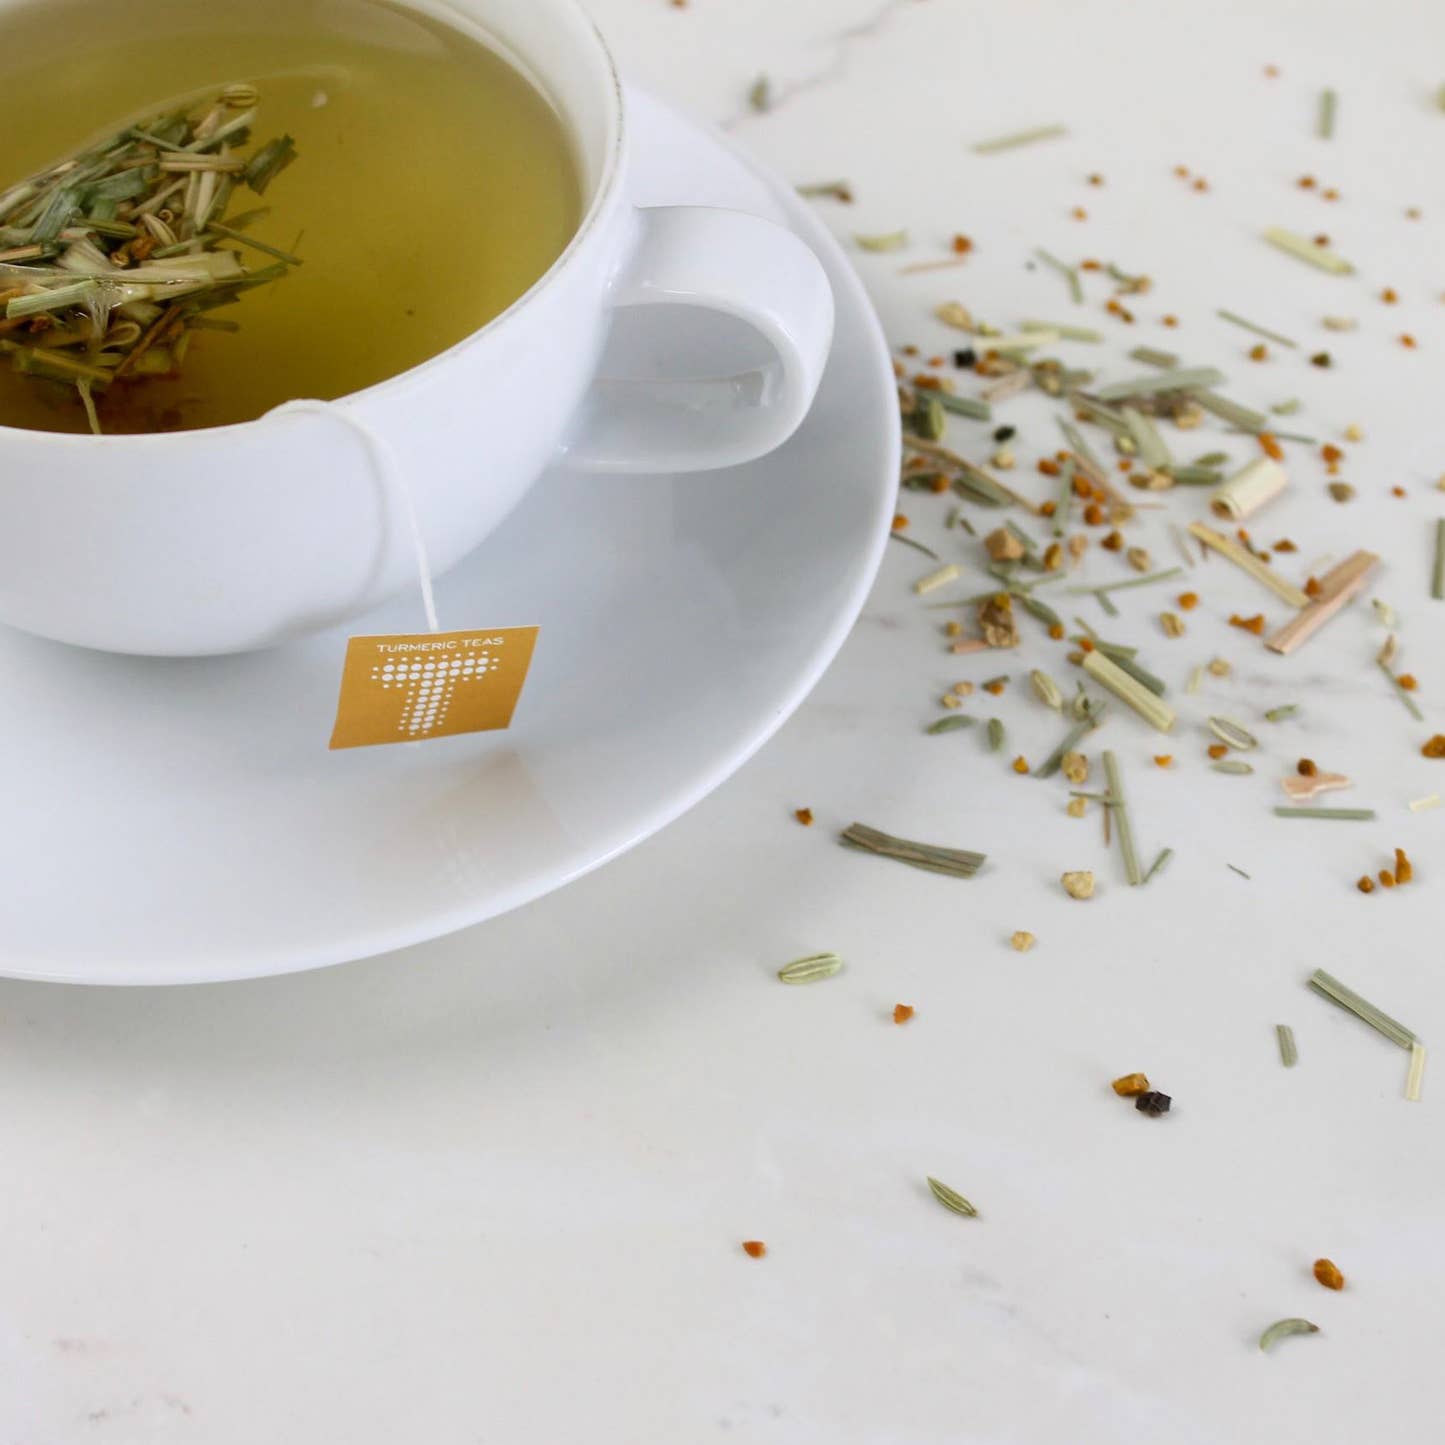 Dusk by Turmeric Teas tea sachet in a white tea cup with saucer and loose leaf tea in background